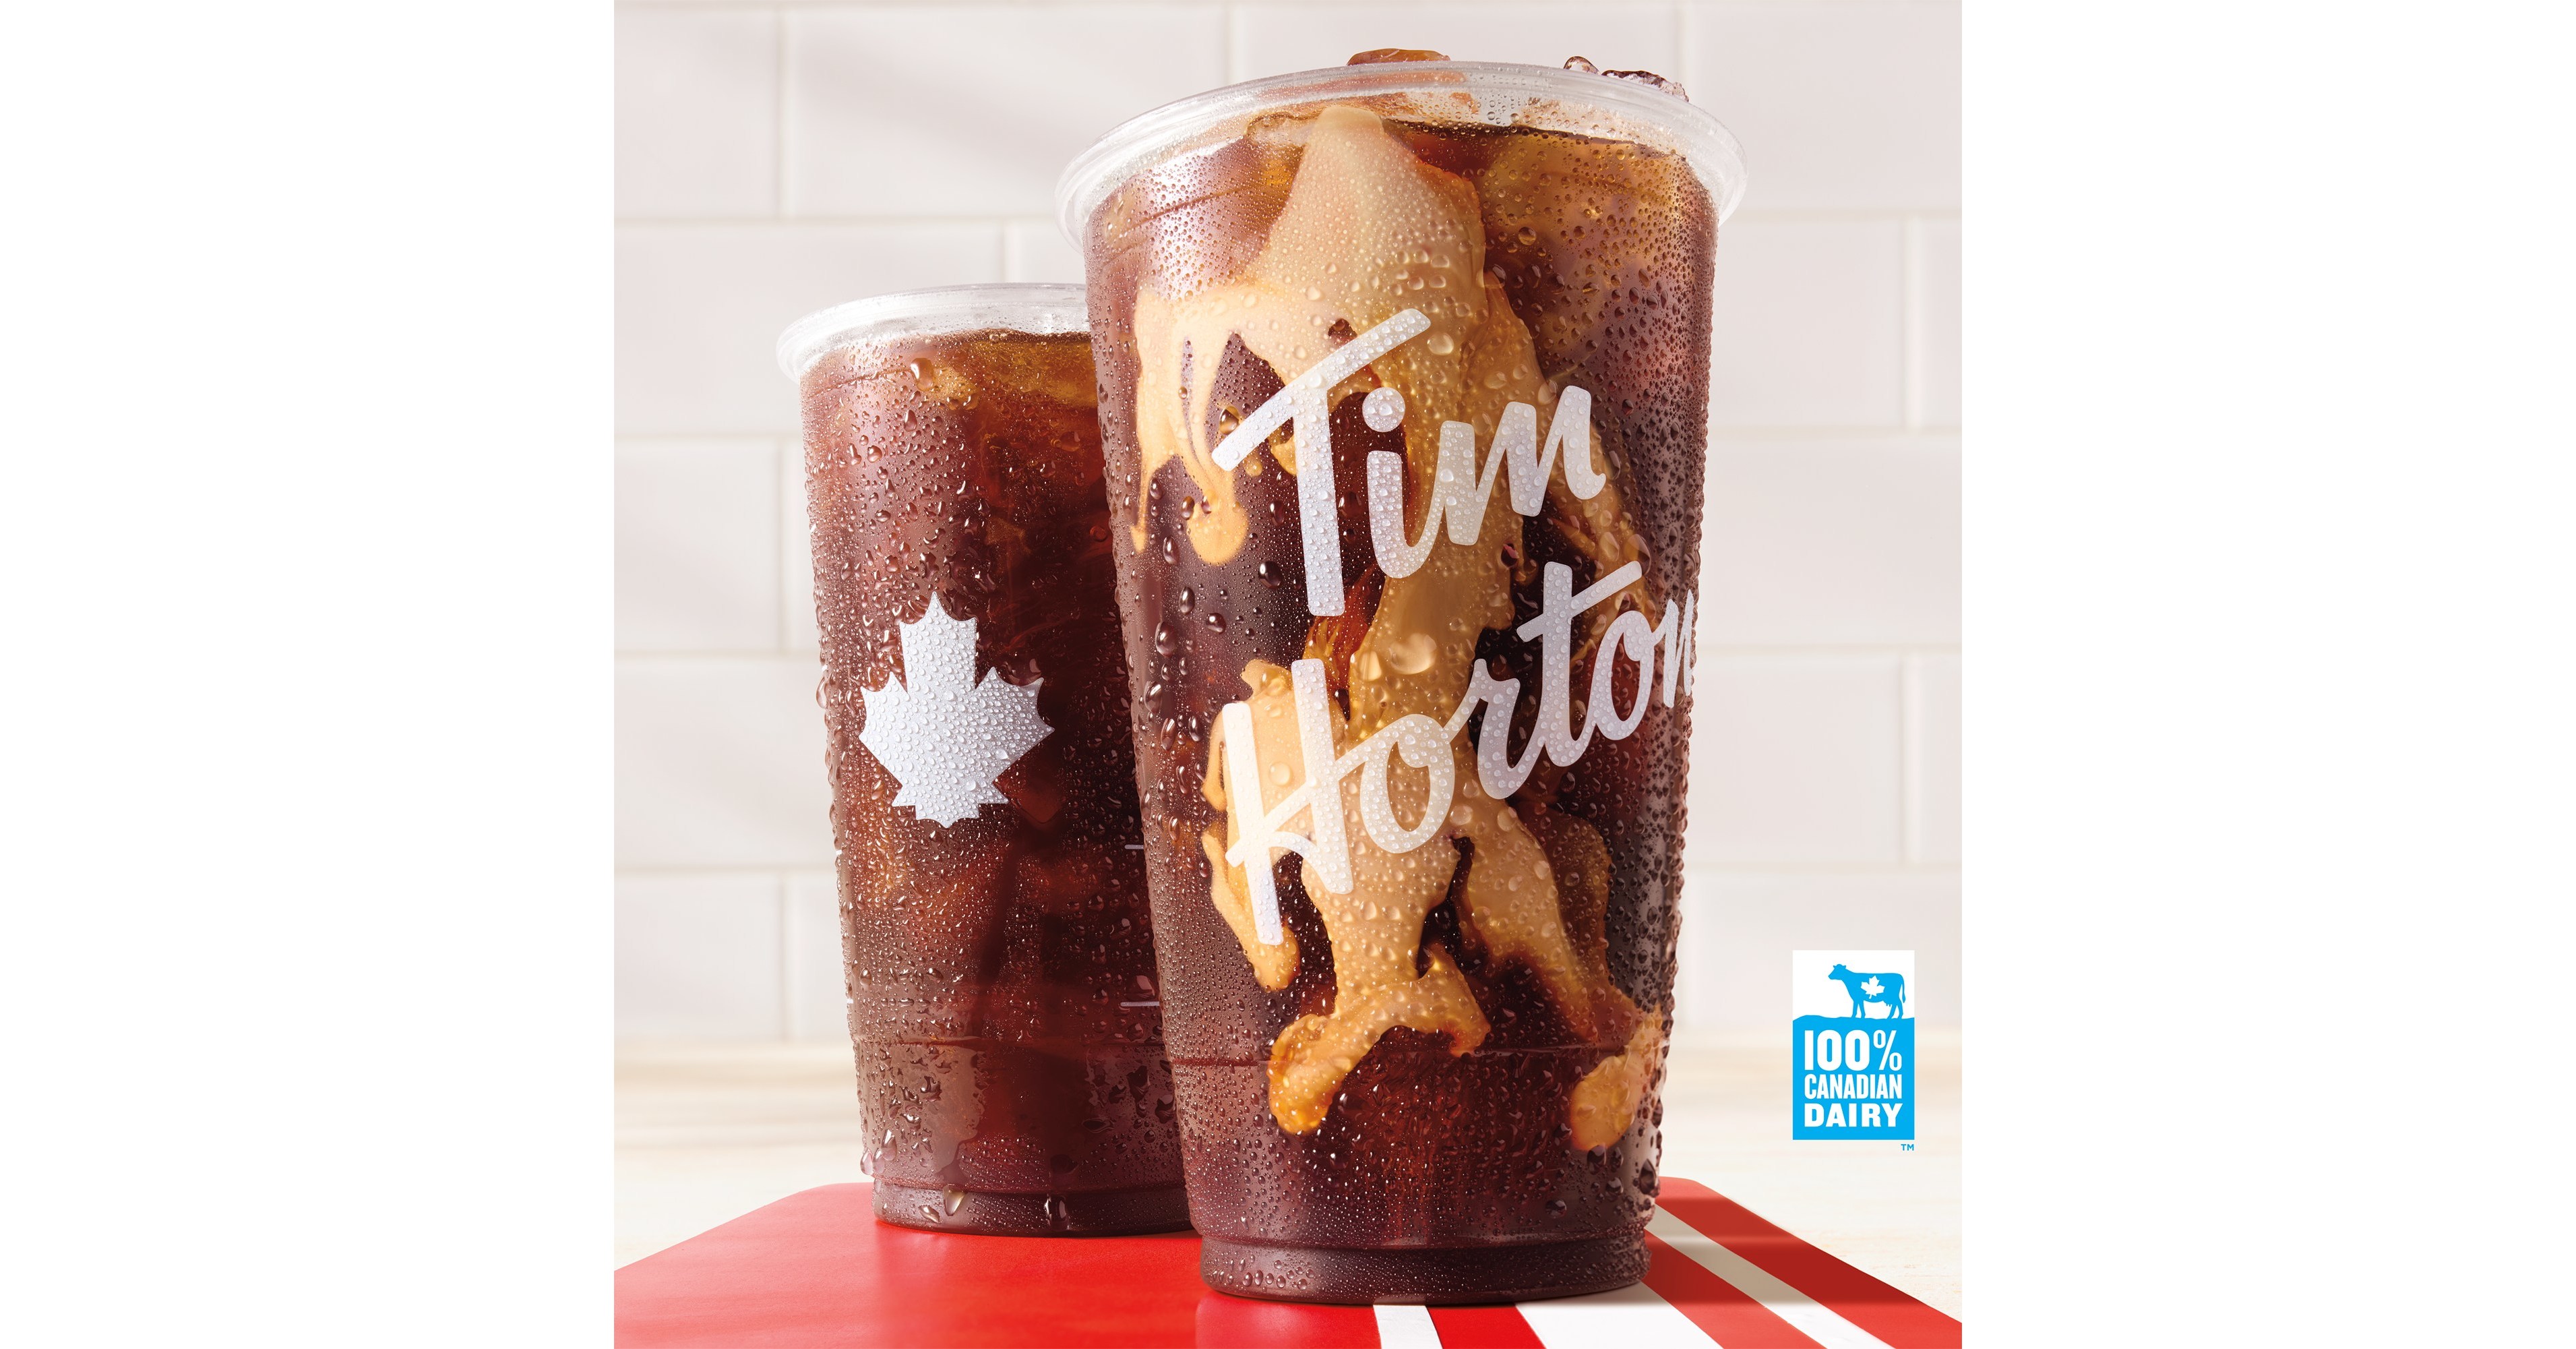 Tim Hortons introduces new coffee creamers - FoodBev Media